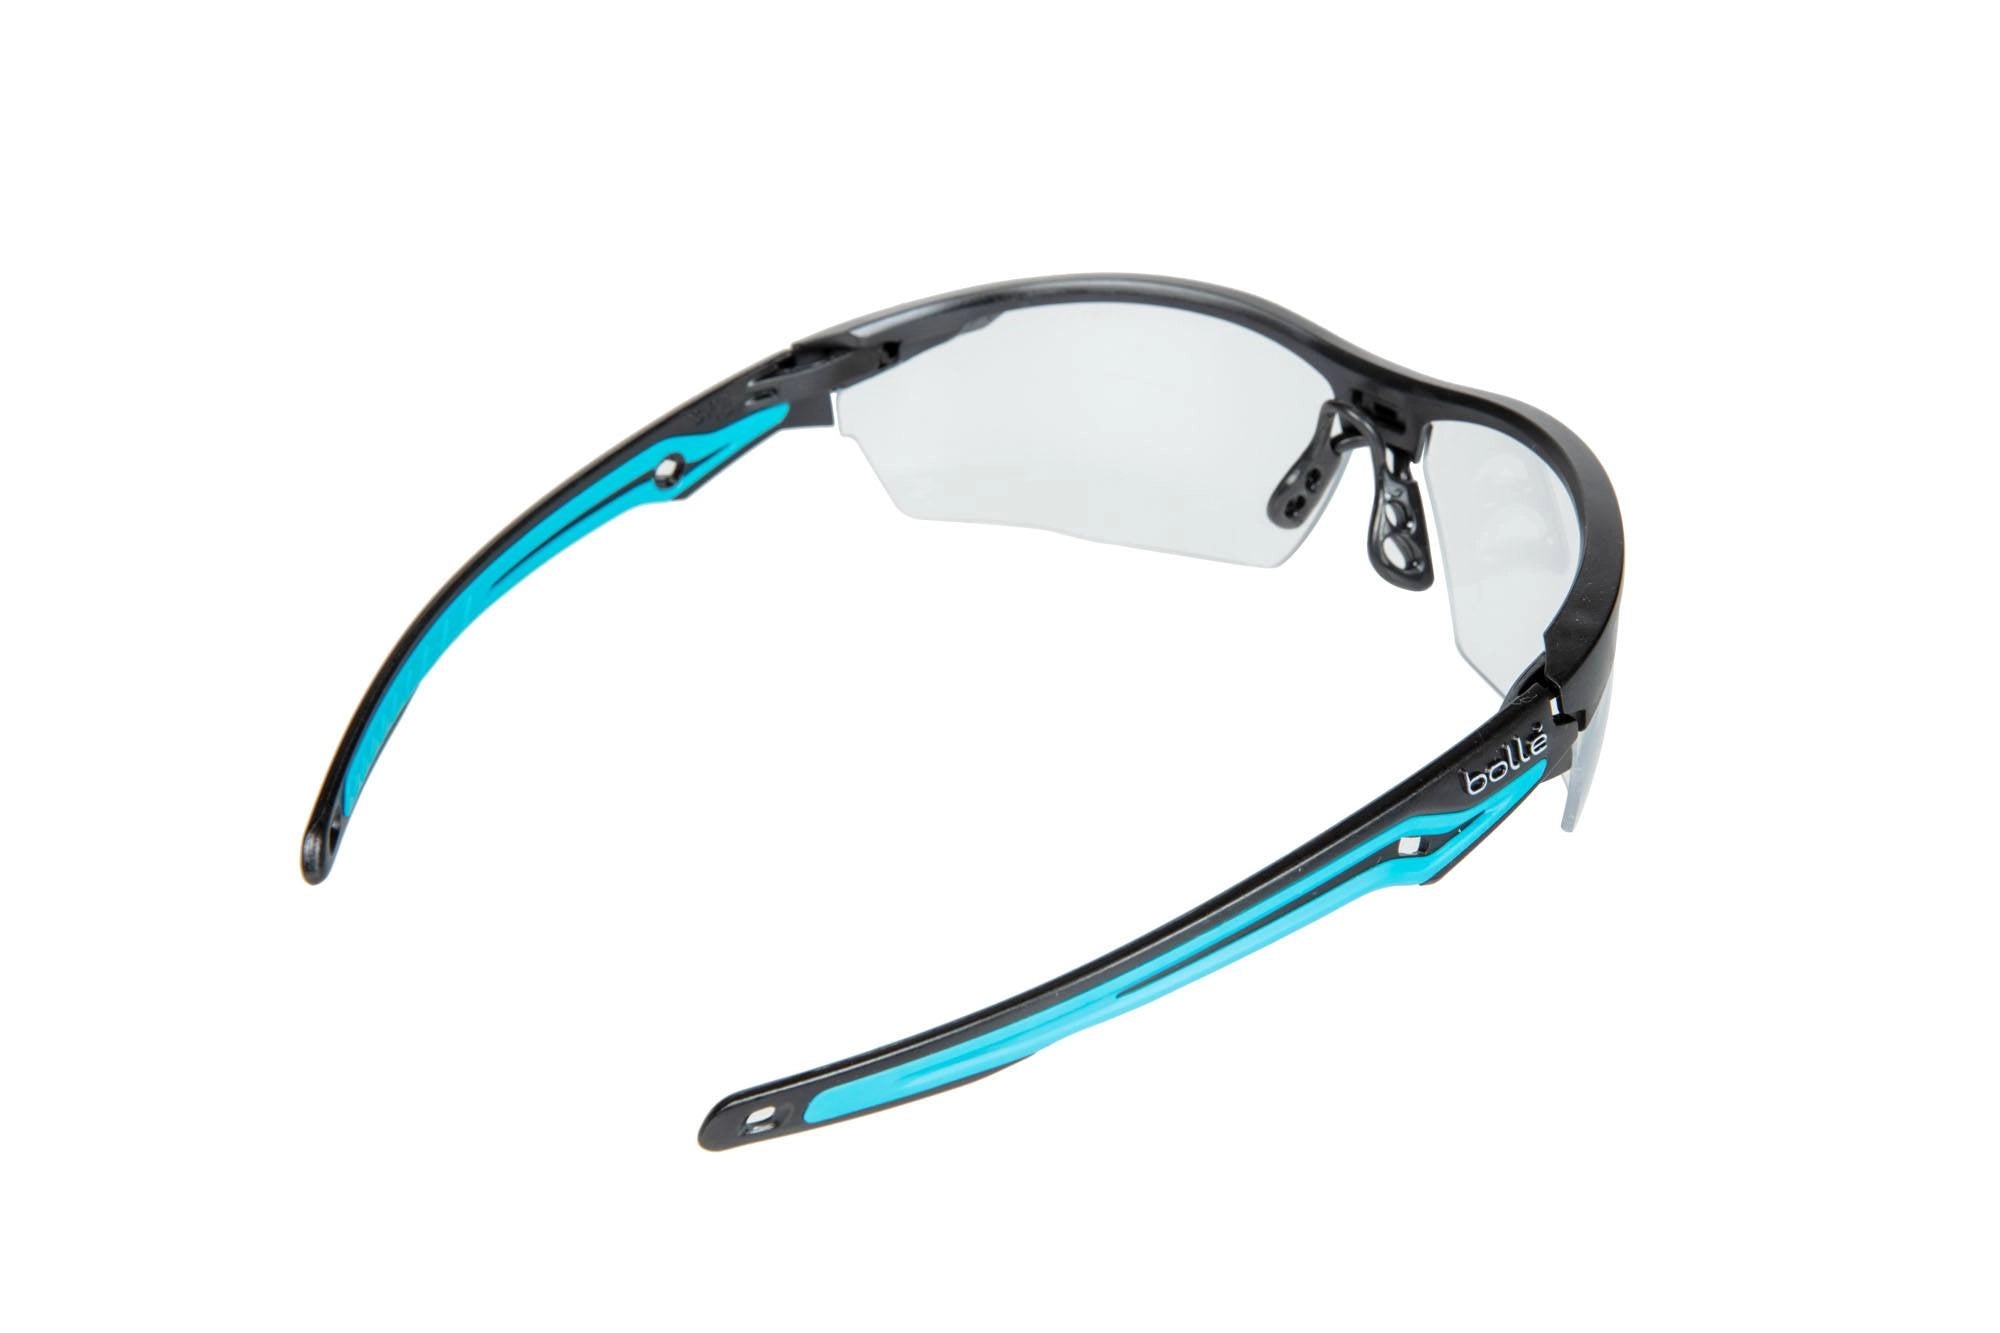 Bolle Safety - TRYON Safety Glasses - Clear